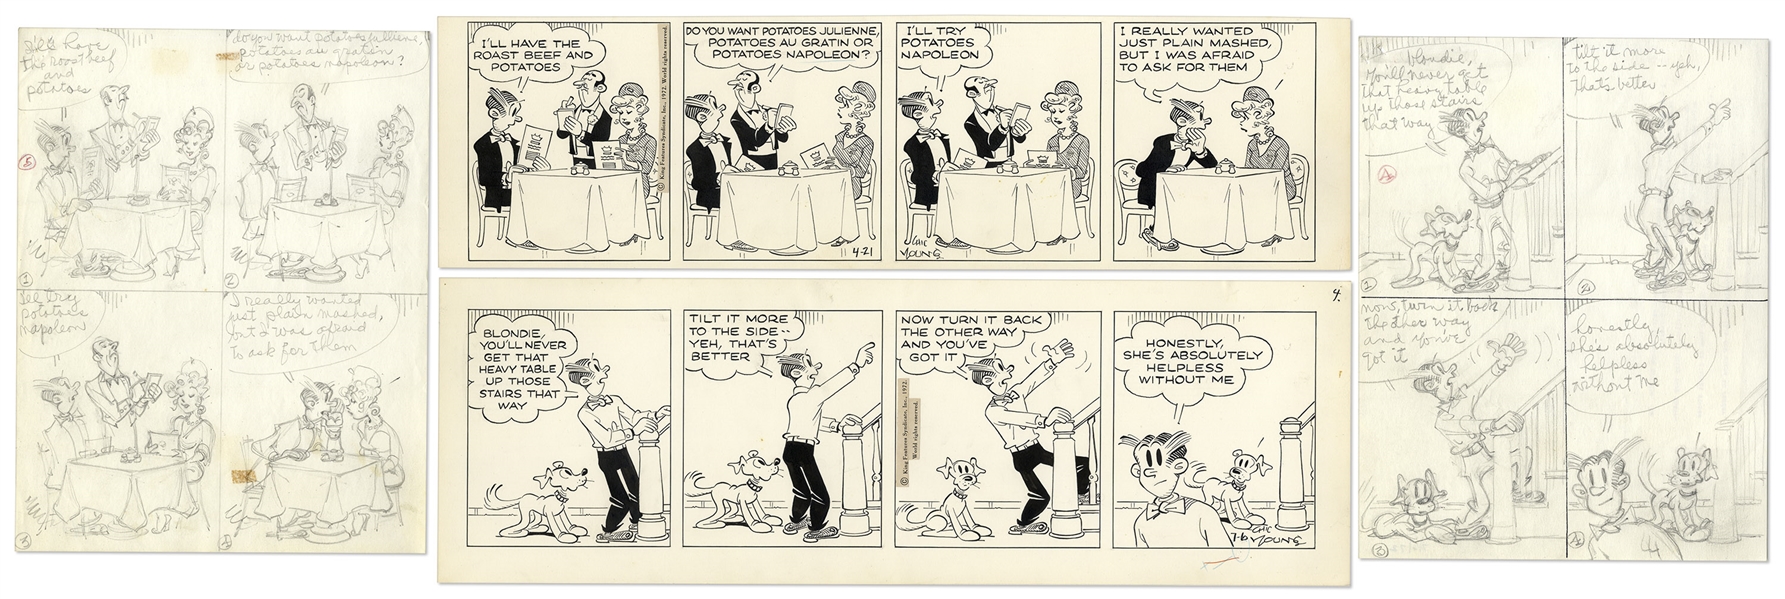 2 Chic Young Hand-Drawn ''Blondie'' Comic Strips From 1972 -- With Chic Young's Original Artwork for Both